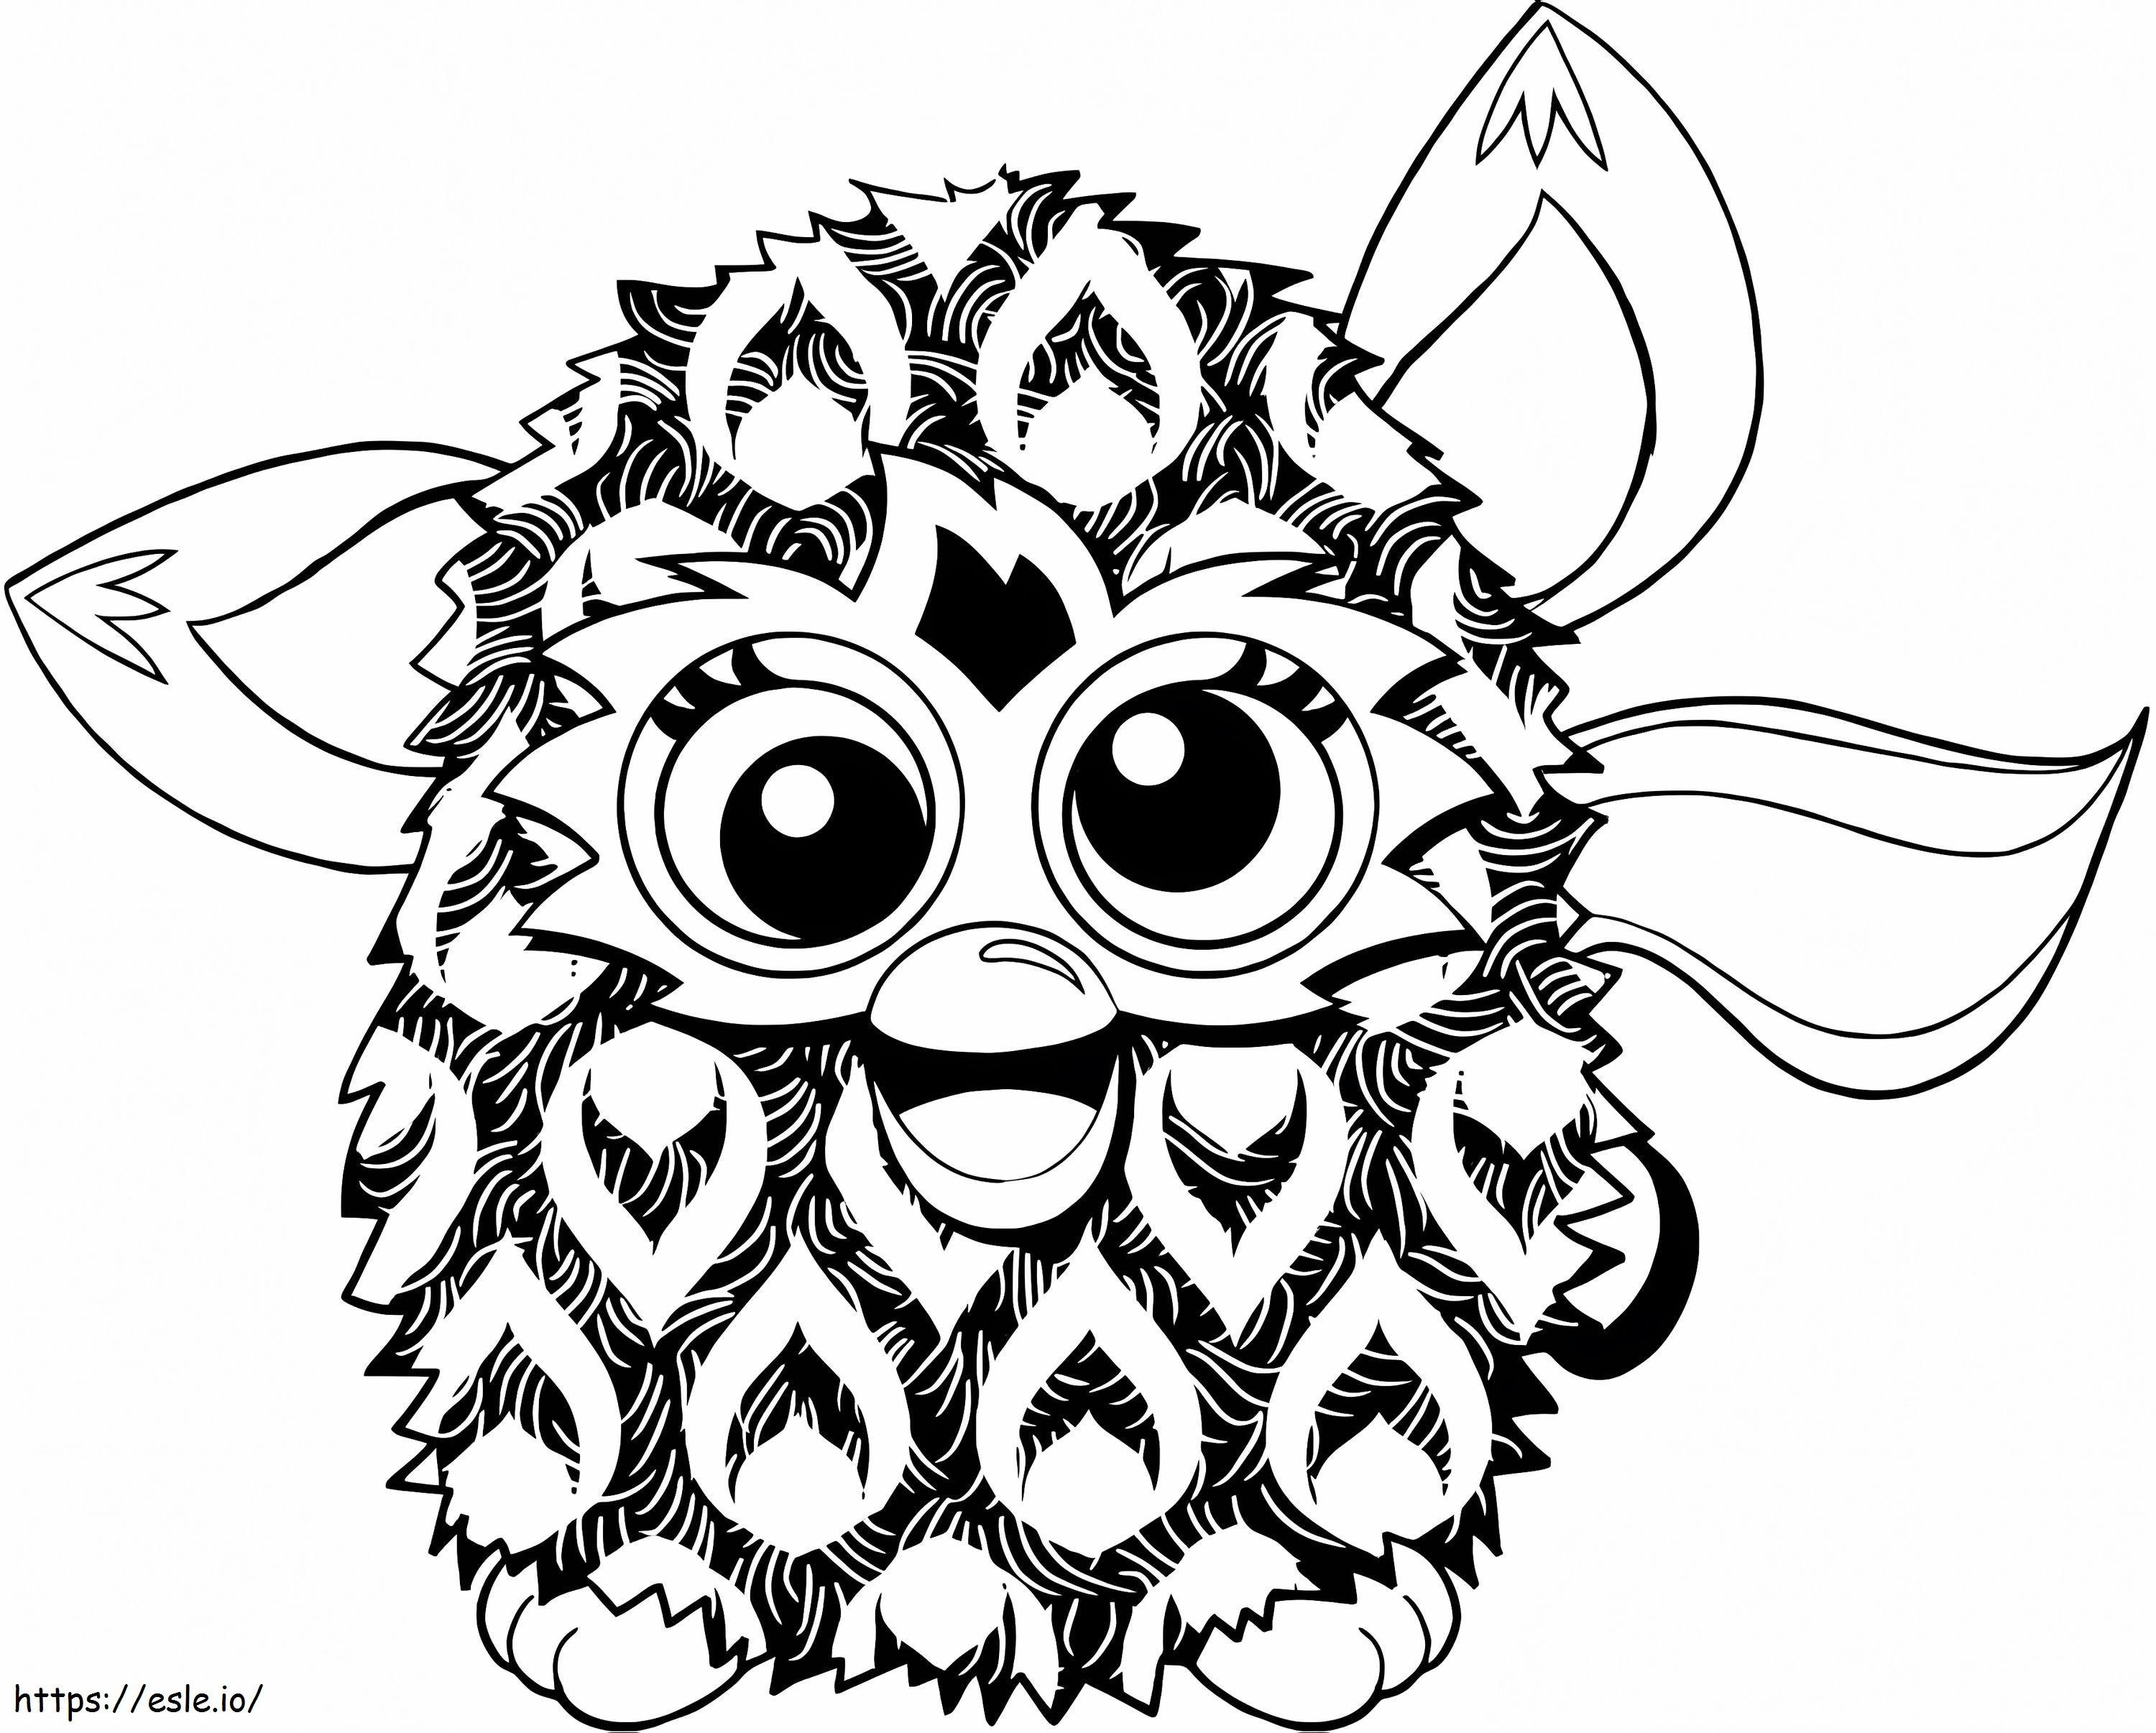 Play With Furby coloring page